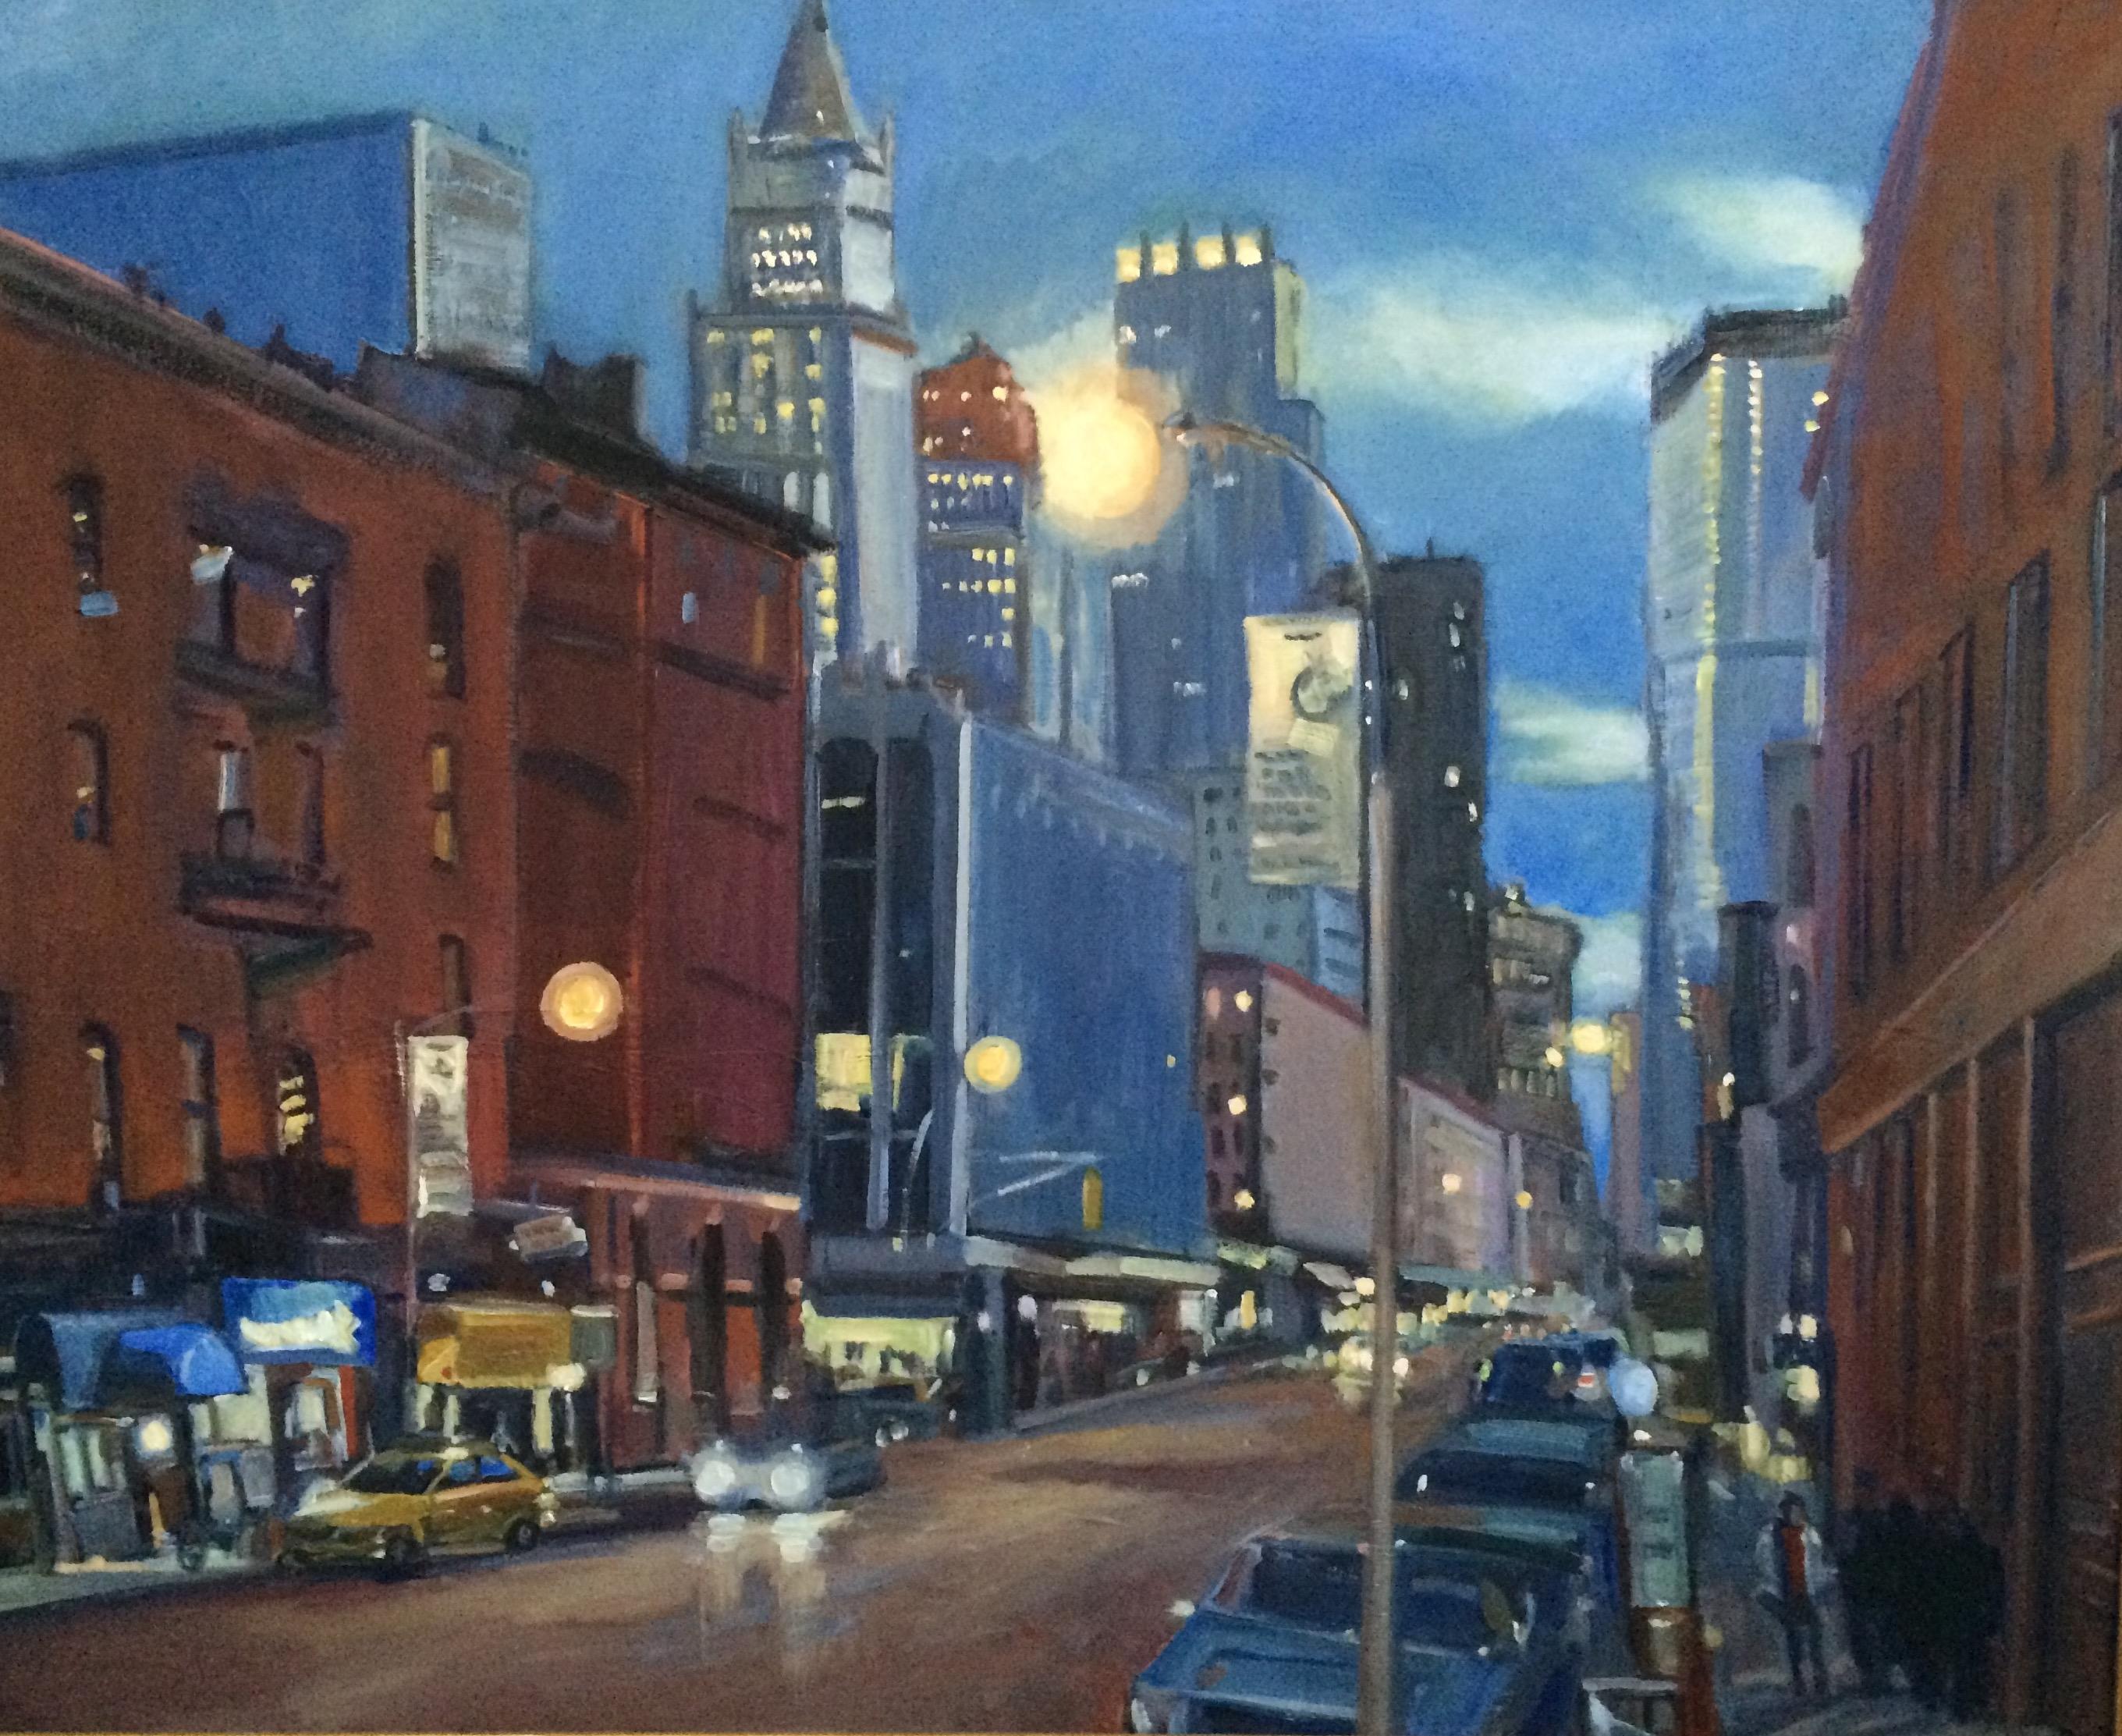 Who is the artist of the painting “New York City?”